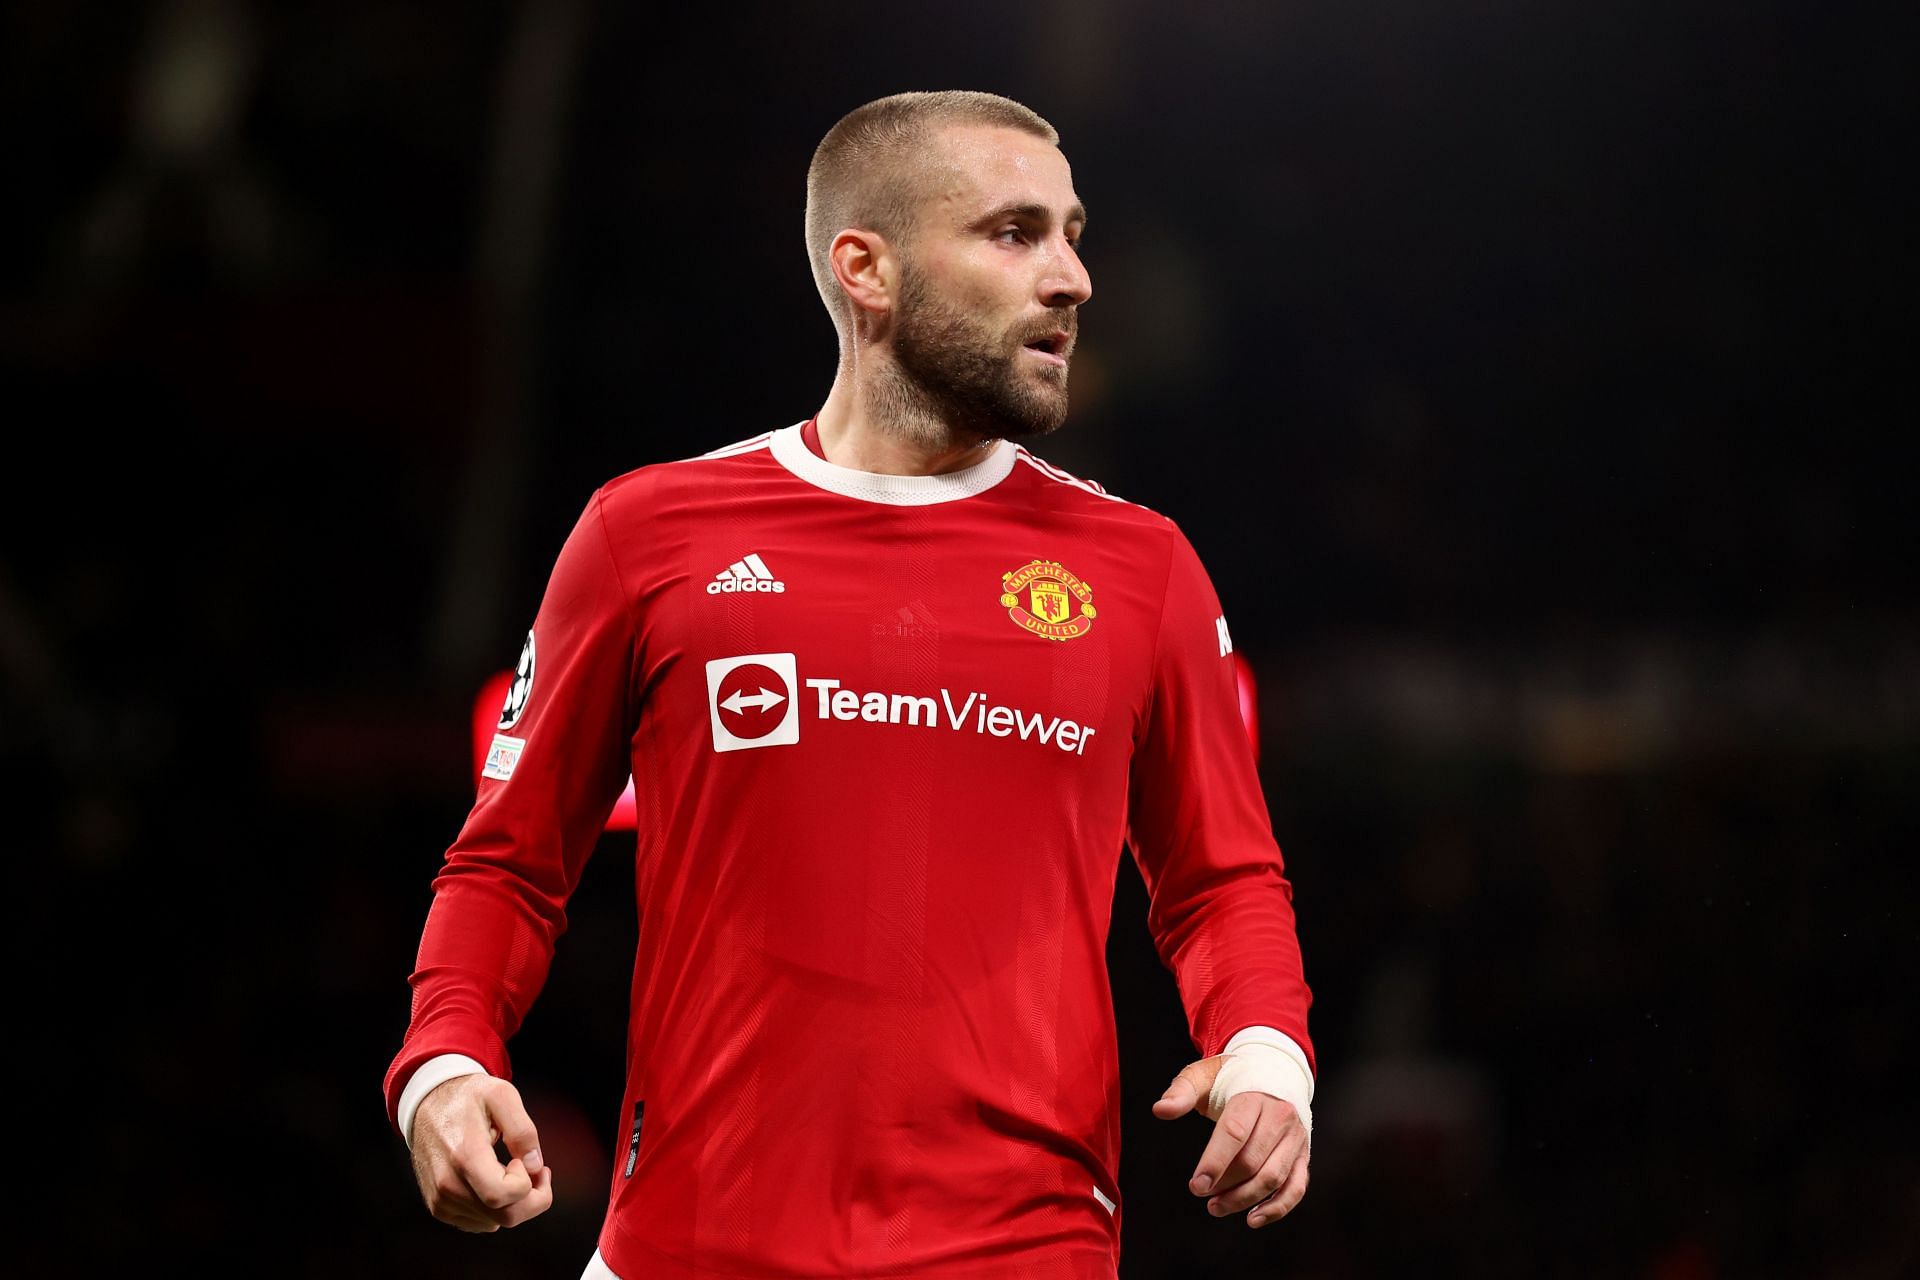 Shaw had seven goal contributions with United last season